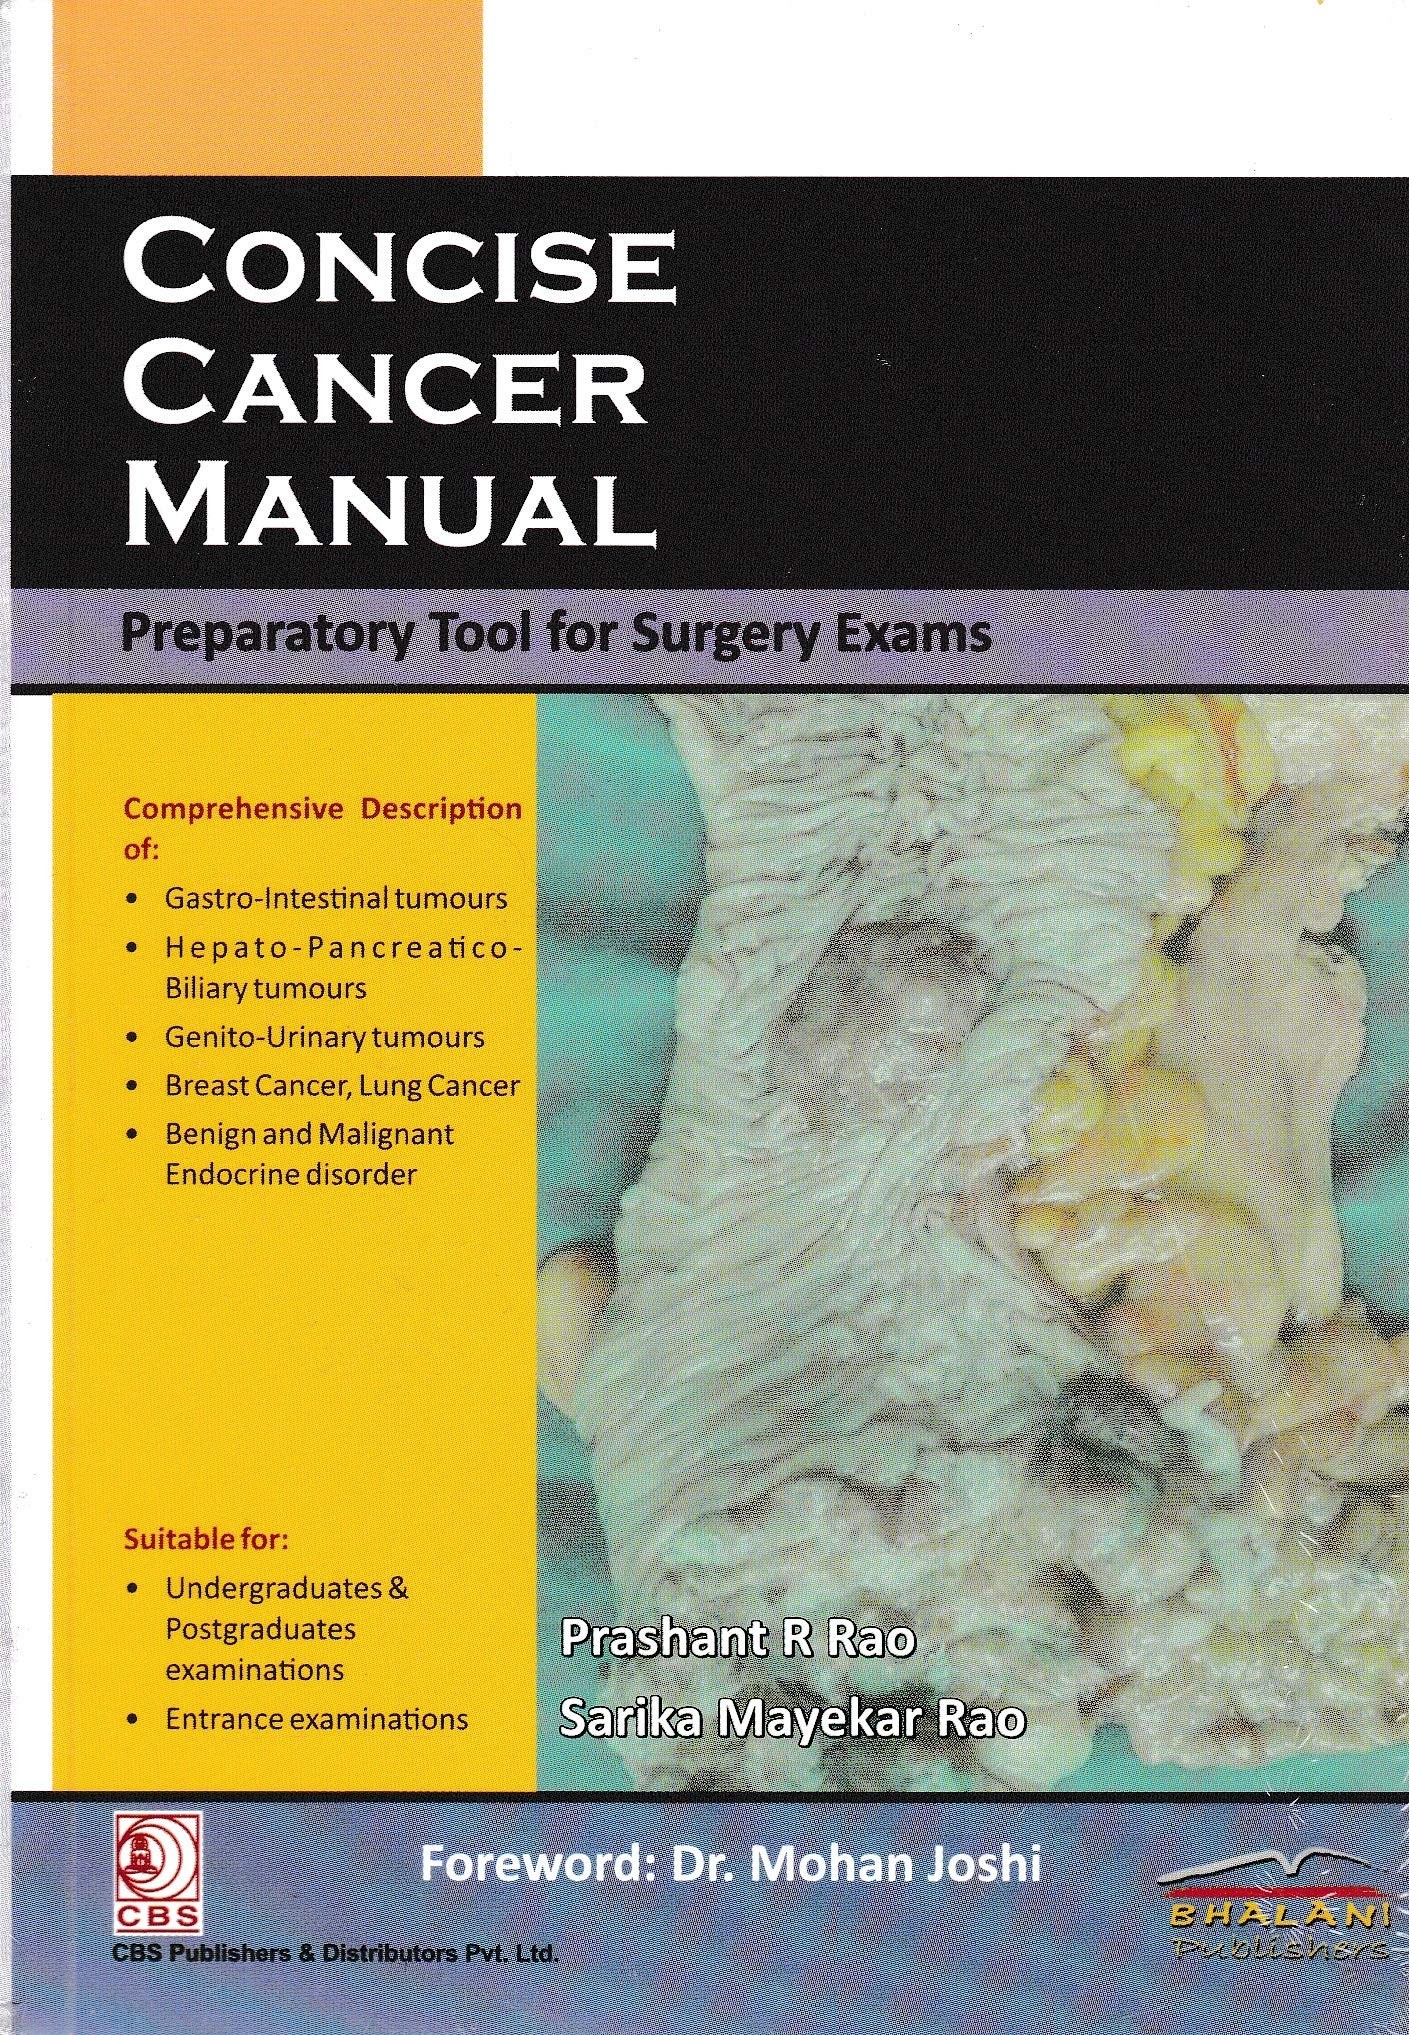 CONCISE CANCER MANUAL 